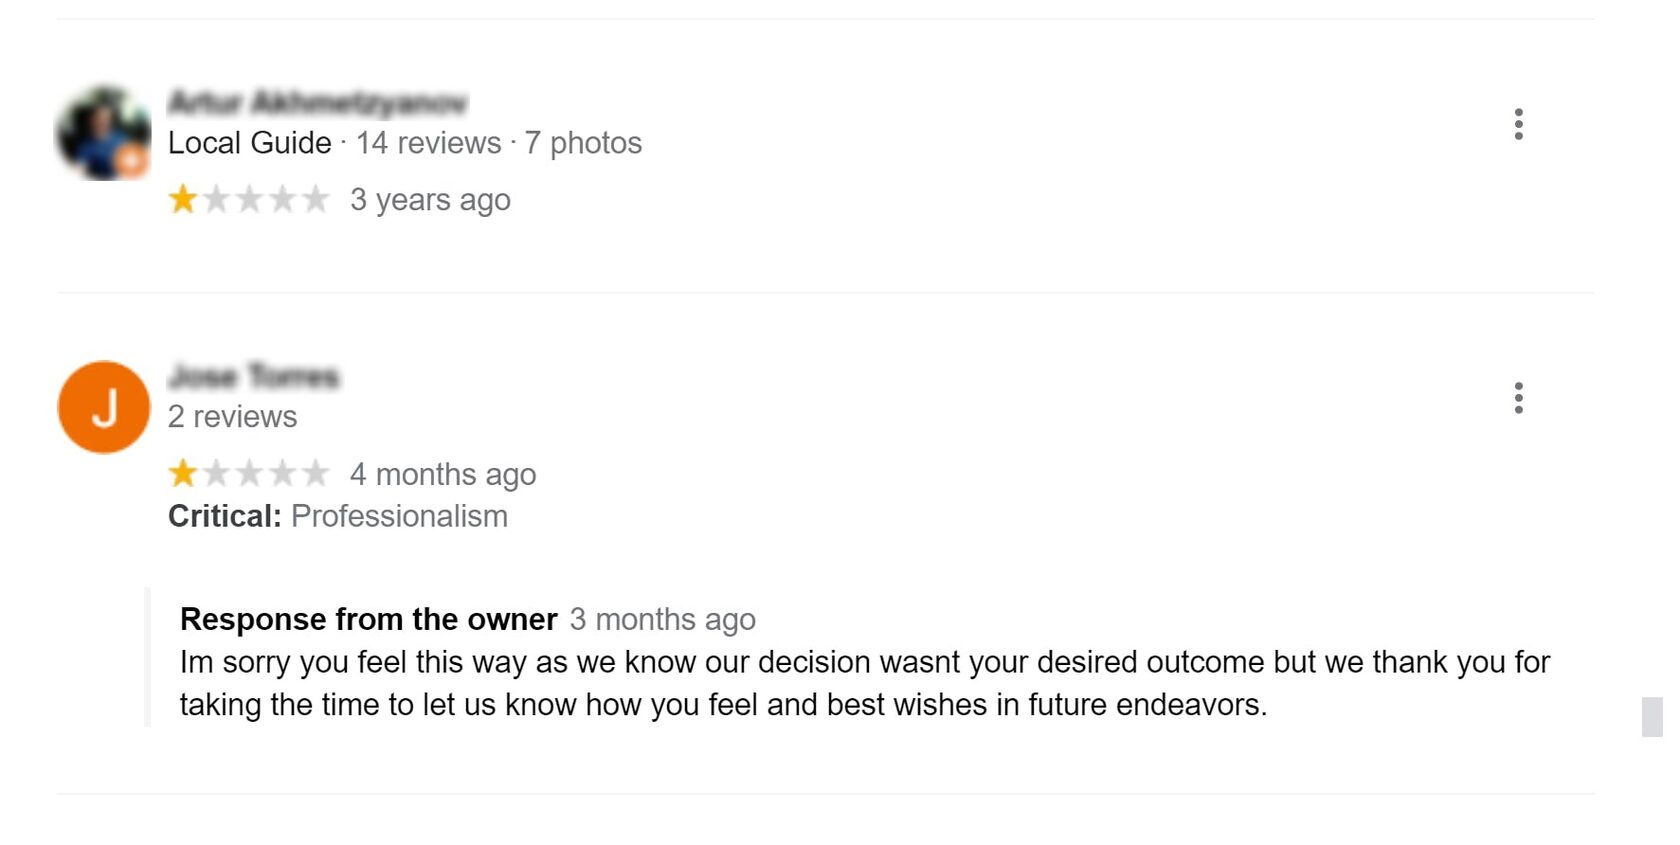 Bad reviews that hurt our client